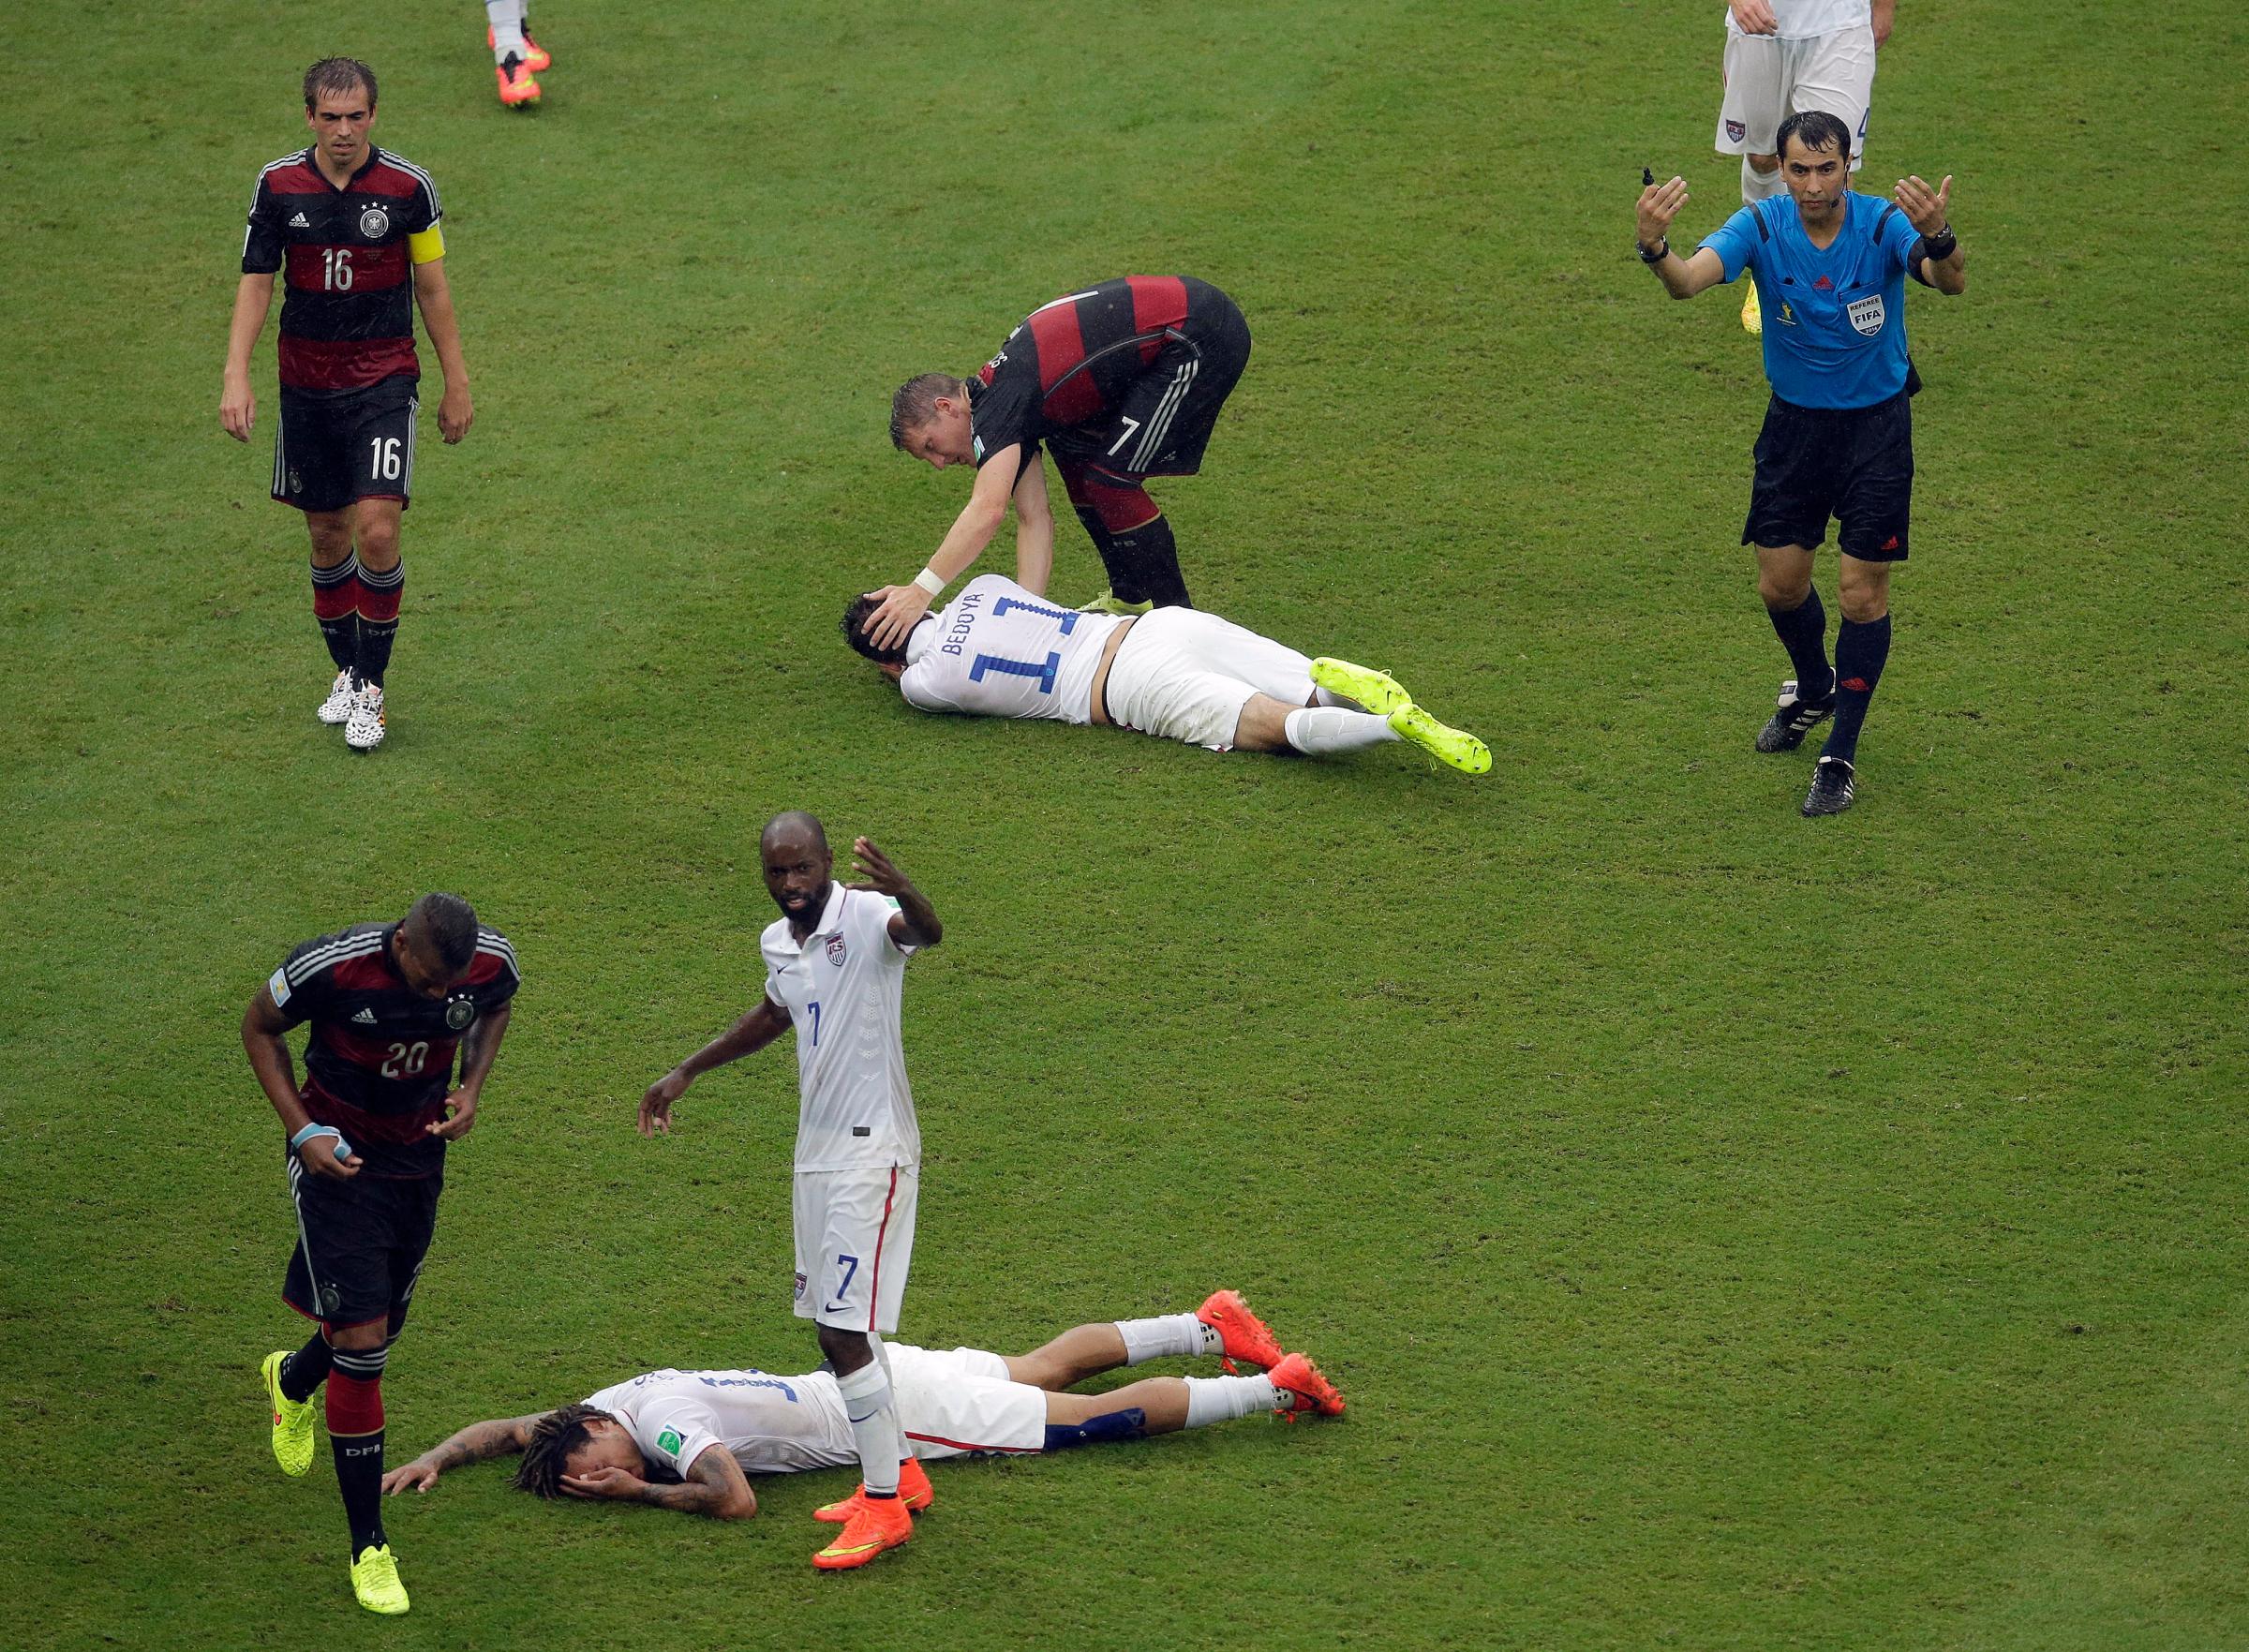 United States' Jermaine Jones, foreground, and United States' Alejandro Bedoya lie injured after colliding with each other at the Arena Pernambuco in Recife, Brazil on June 26, 2014.